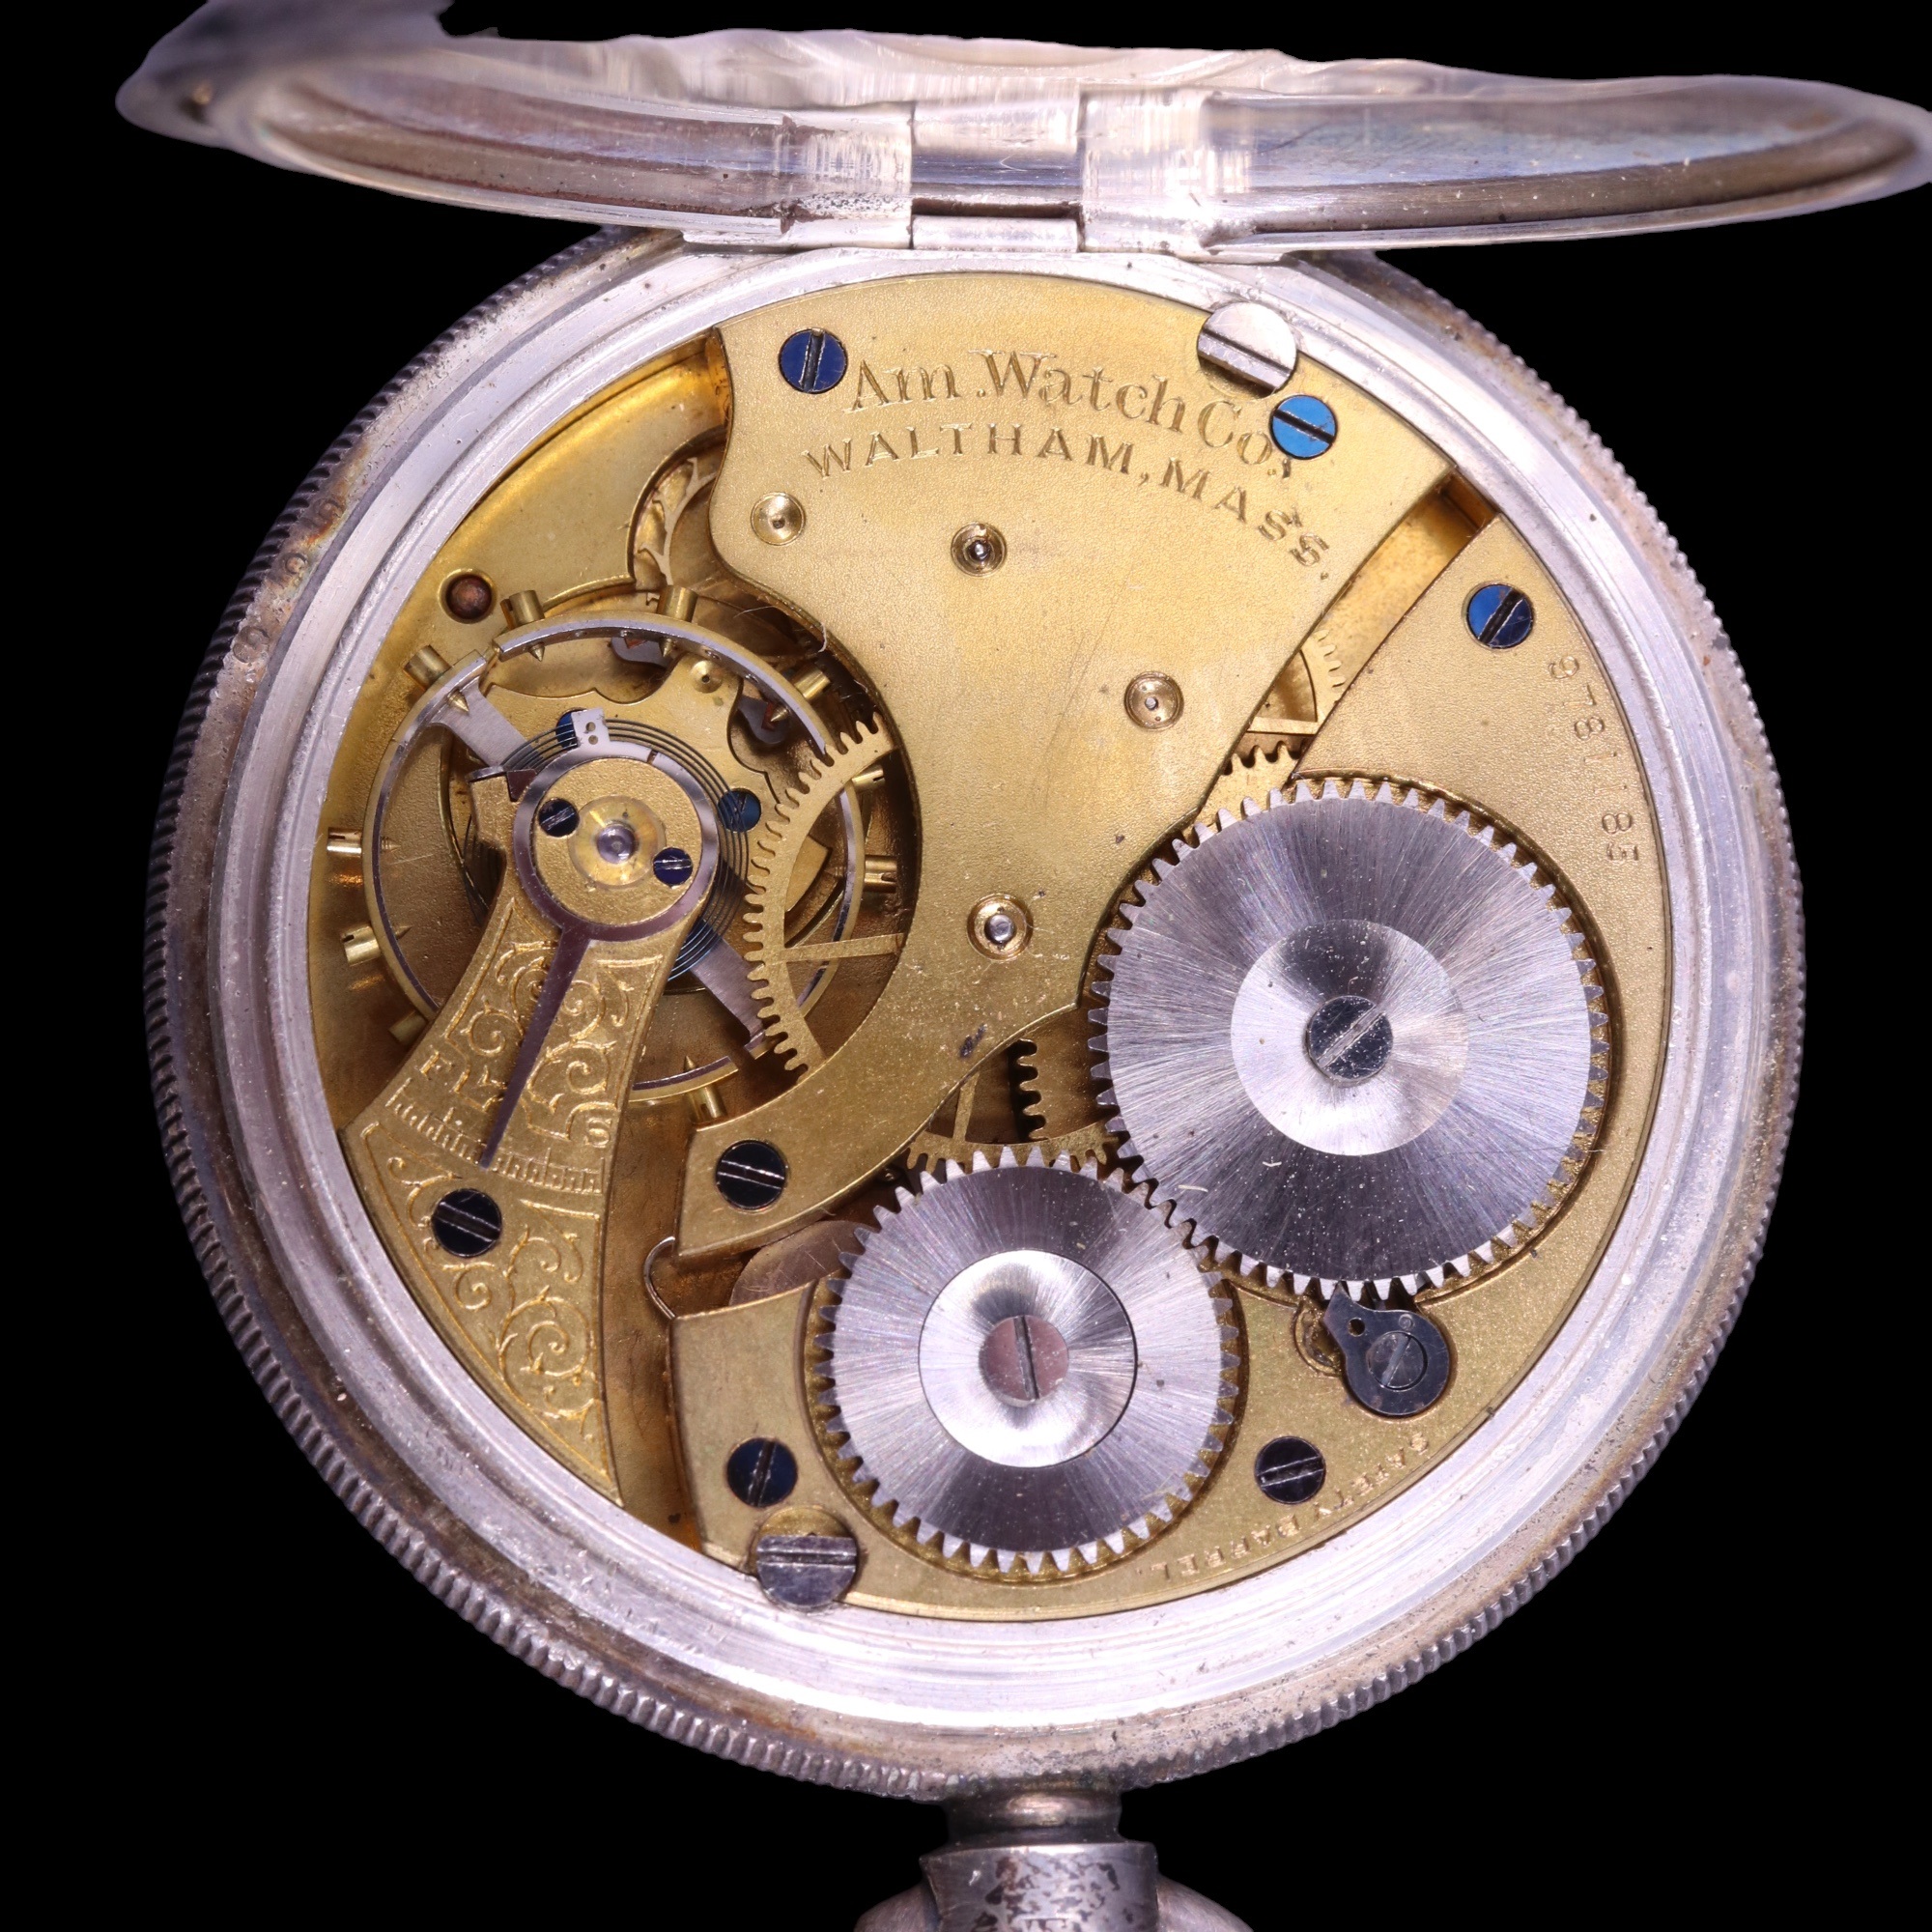 An Edwardian silver pocket watch by Waltham, having a crown-wound movement and white enamel face - Image 3 of 5